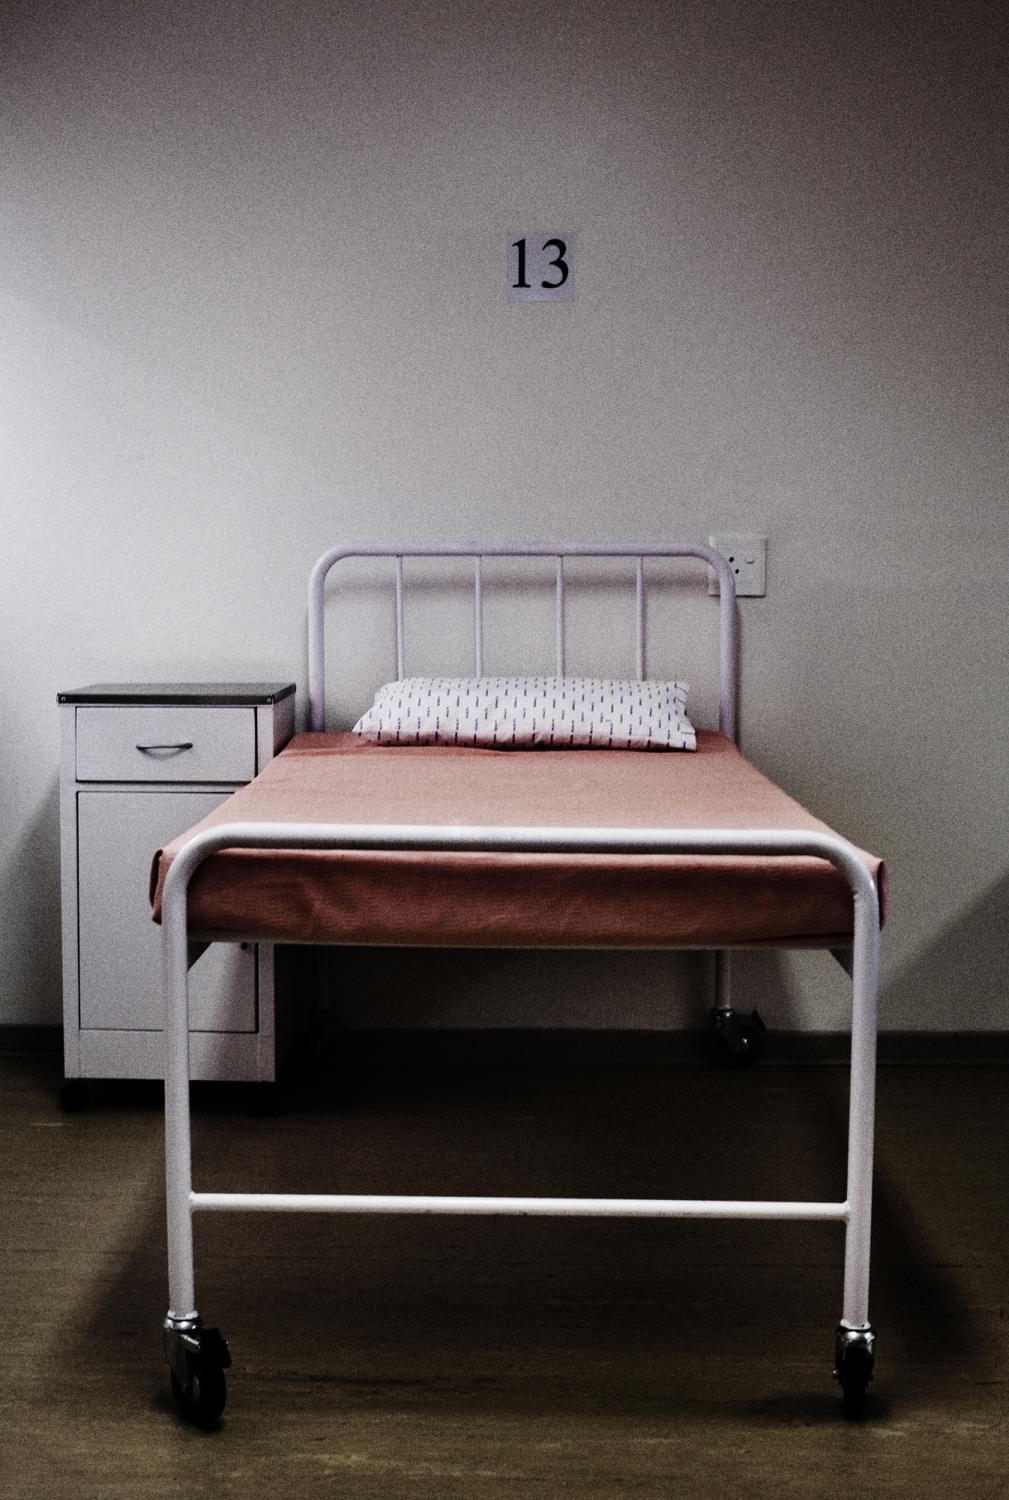 Tuberculosis / Lesotho - Lesotho.
An empty bed at the Maseru TB clinic.
Lesotho...